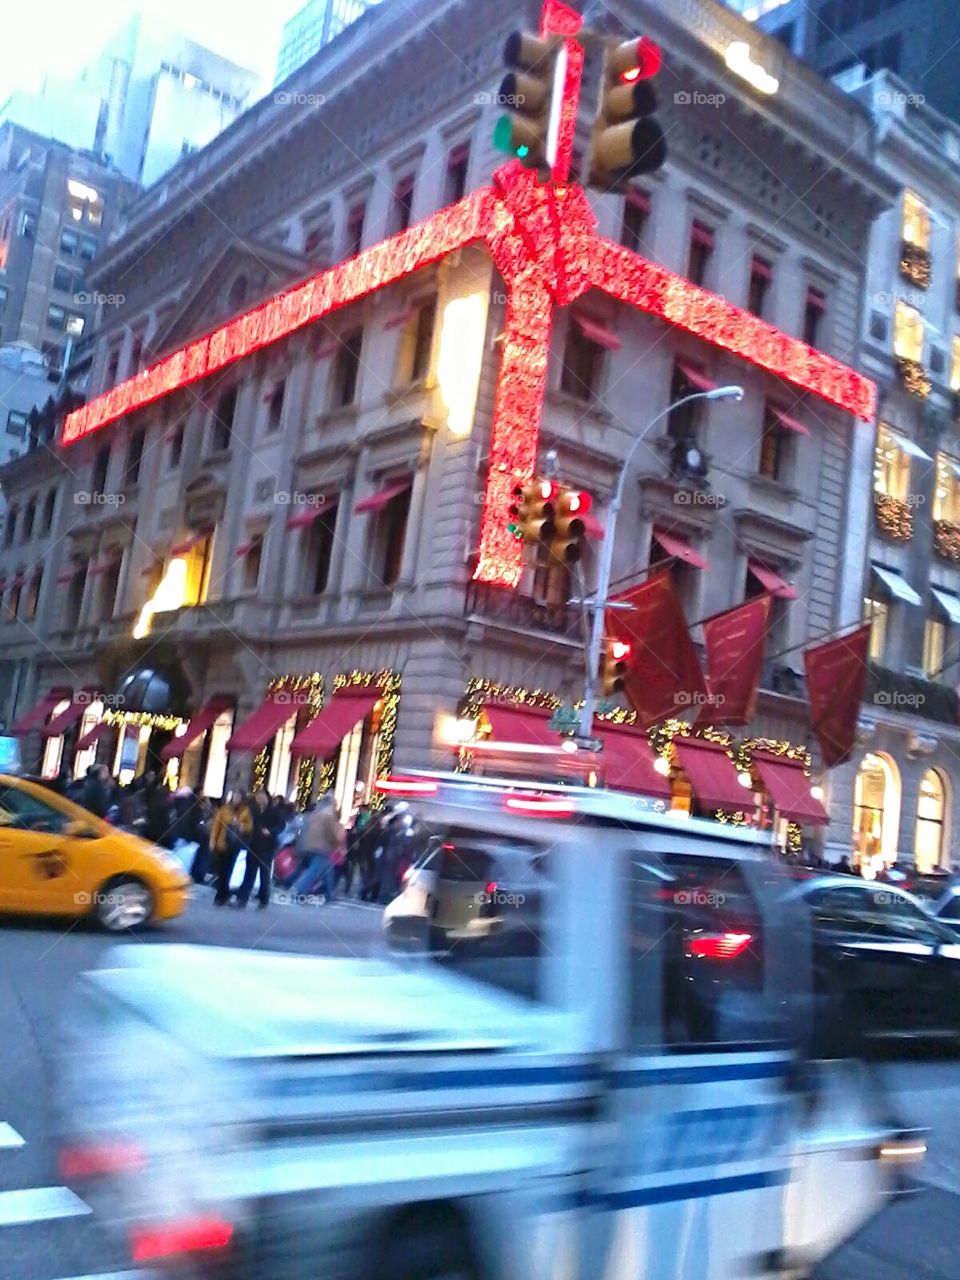 New York holiday. A trip to New York for the holidays two years ago. Busy streets and festive decor